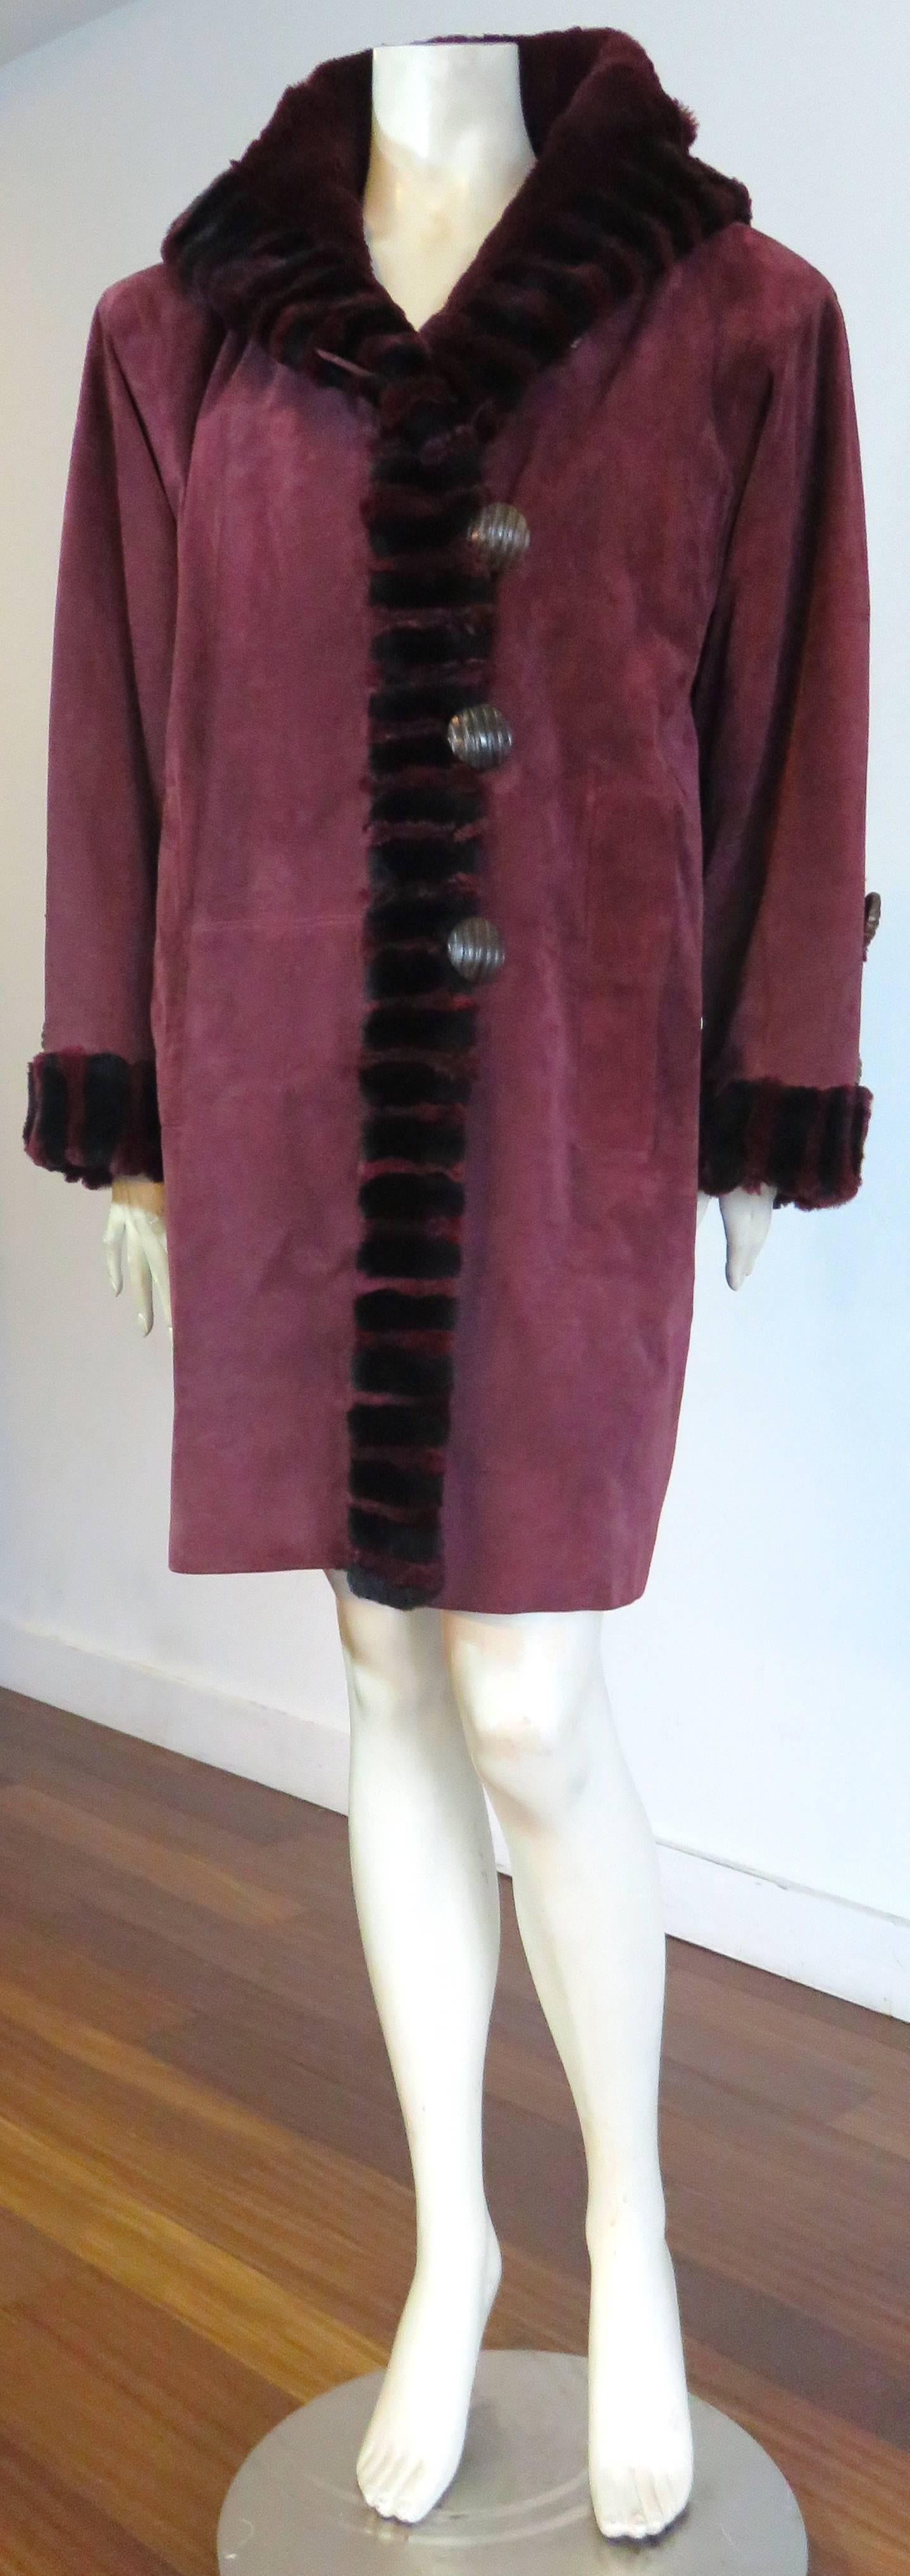 Excellent condition, 1980's YVES SAINT LAURENT FURS, suede skin & fur coat.

This luxurious coat is made of Bordeaux-colored, pig skin suede, and is fully lined in sheared beaver fur lining.

The coat features a gorgeous, seamed-in, striping